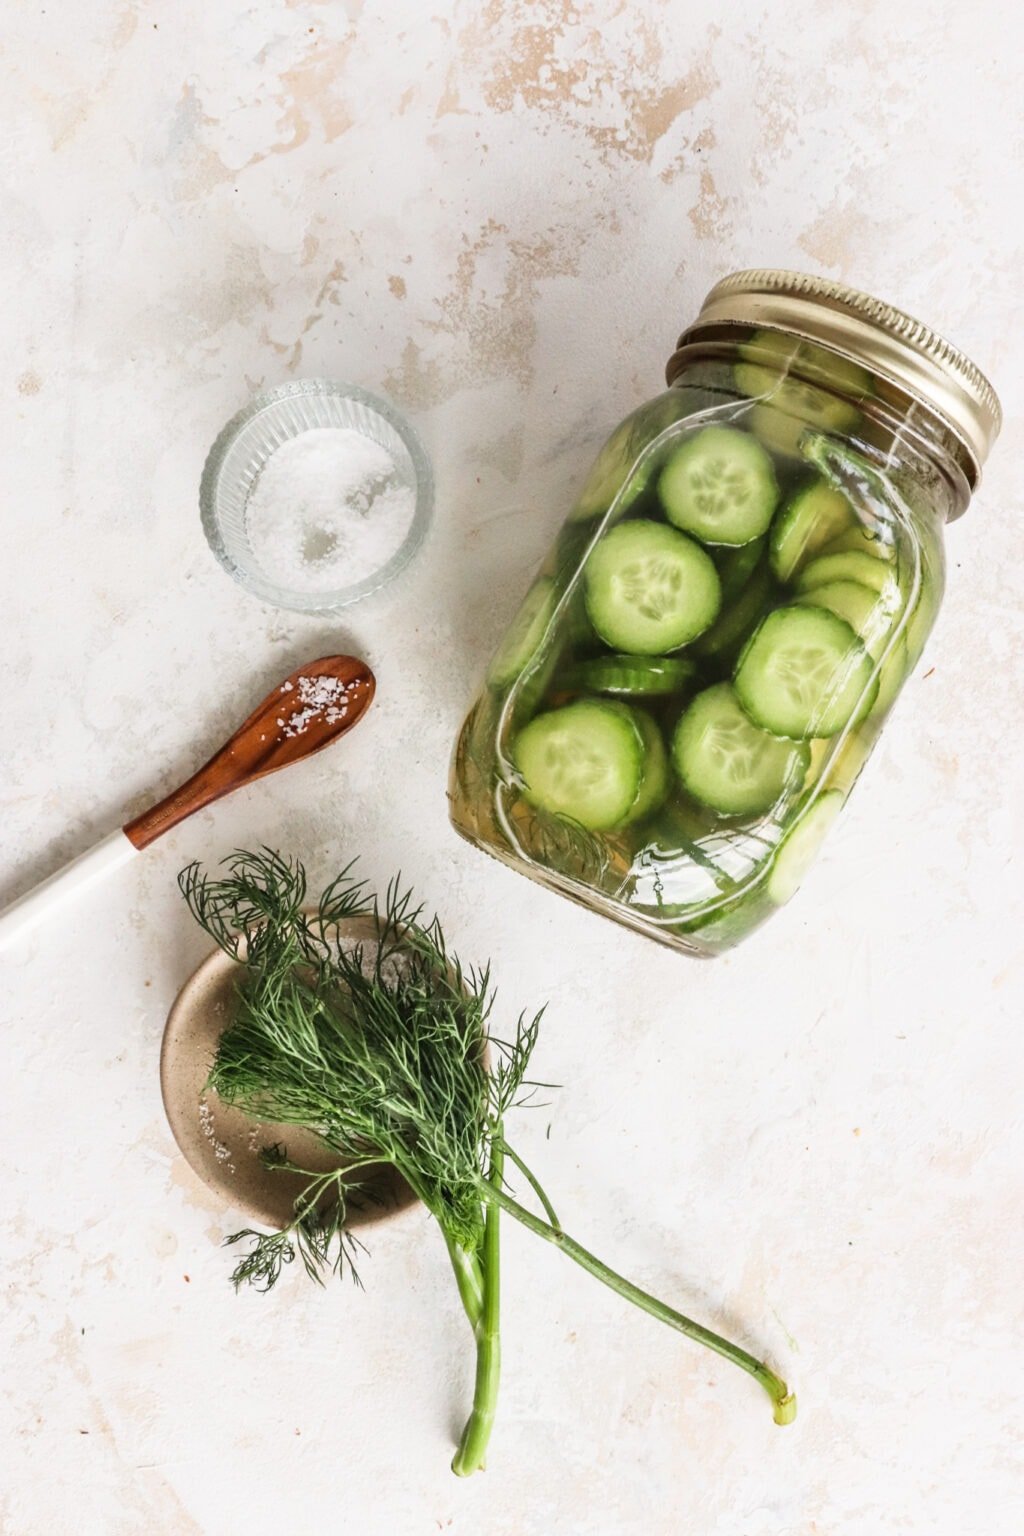 Apple Cider Vinegar Cucumber Pickles with Dill in a pickle jar with a spoon, dill, and salt on the side